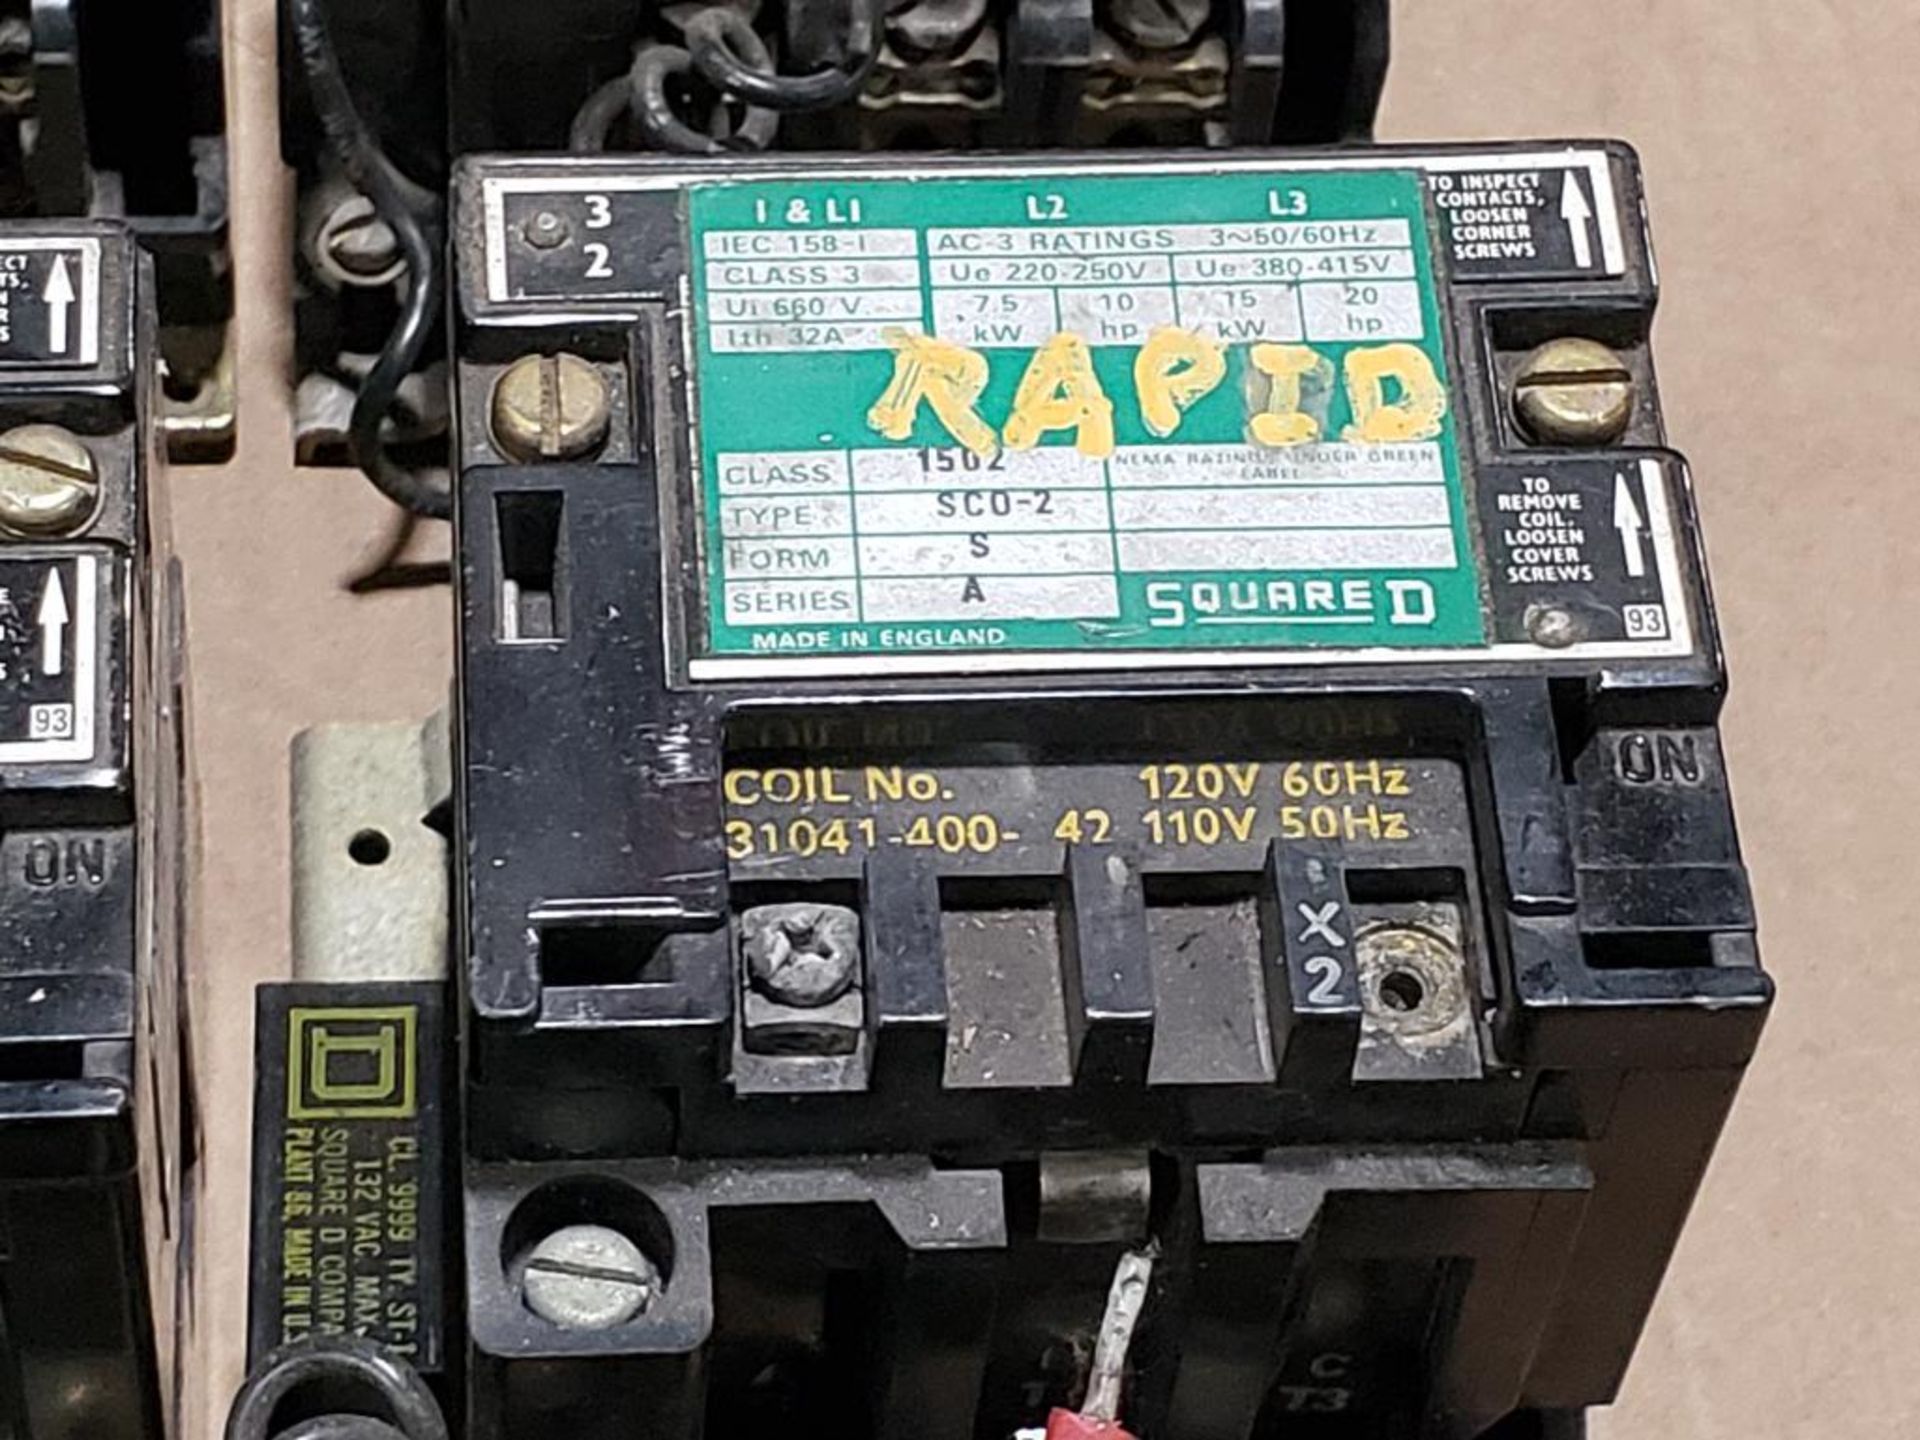 Qty 12 - Square D contactor. Class 1502 type SCO-2. - Image 6 of 14